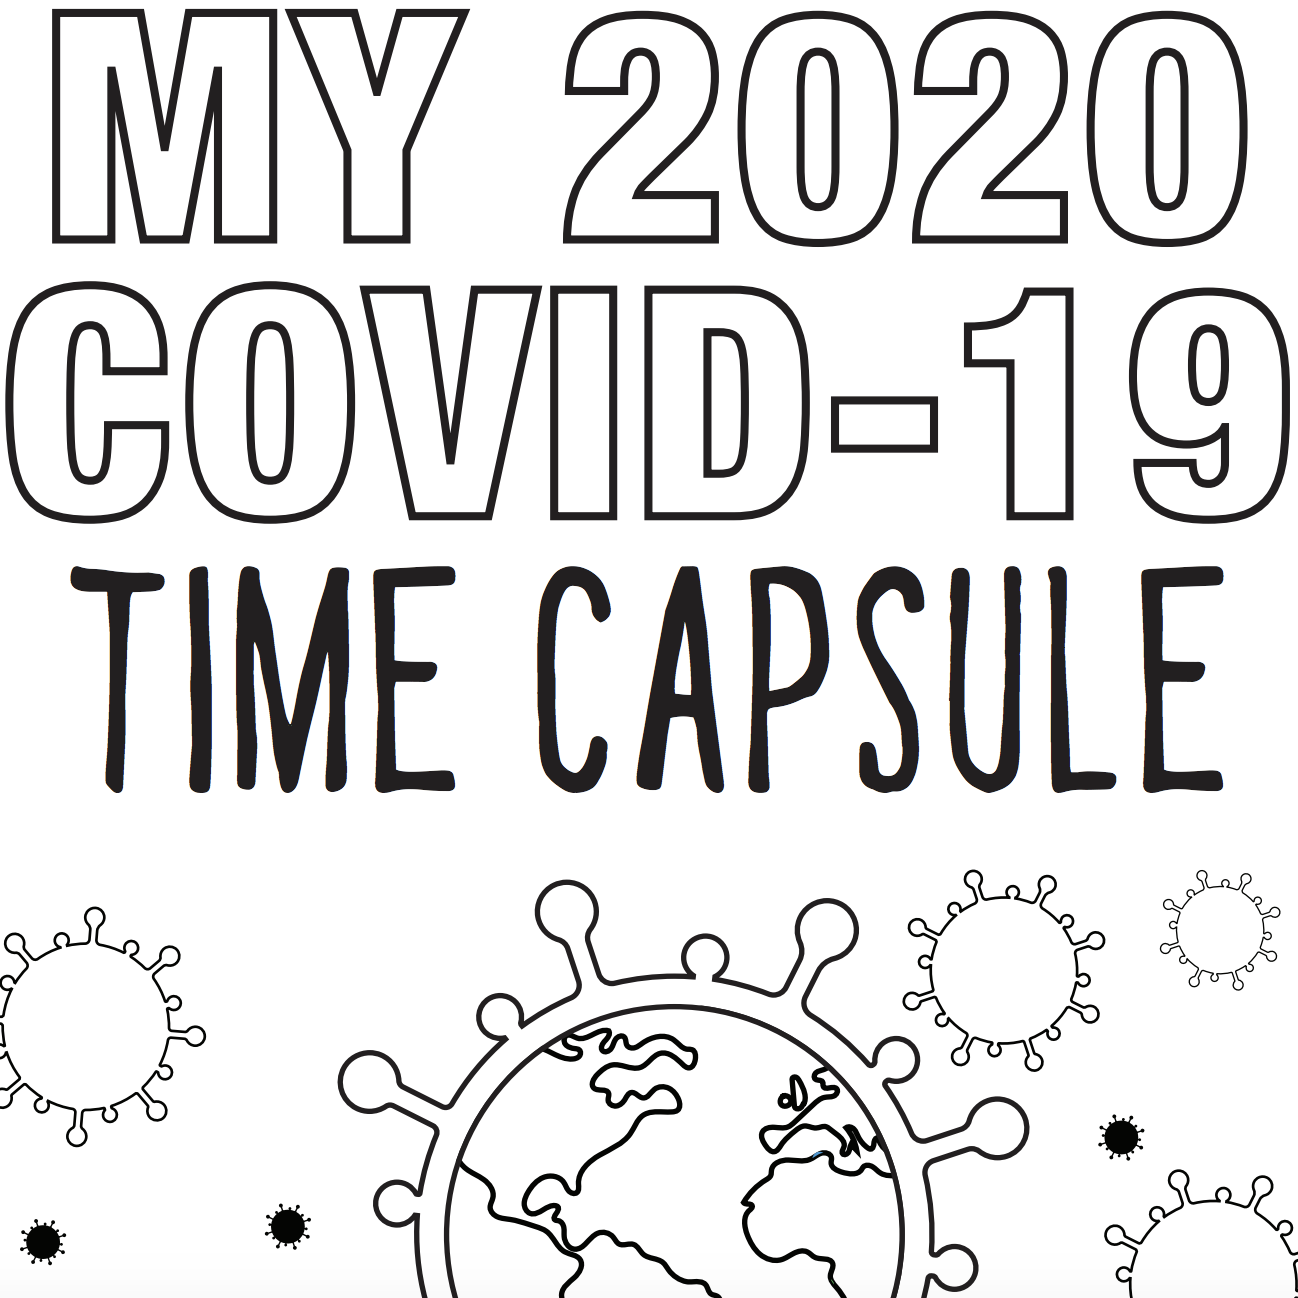 My 2020 COVID-19 Time Capsule